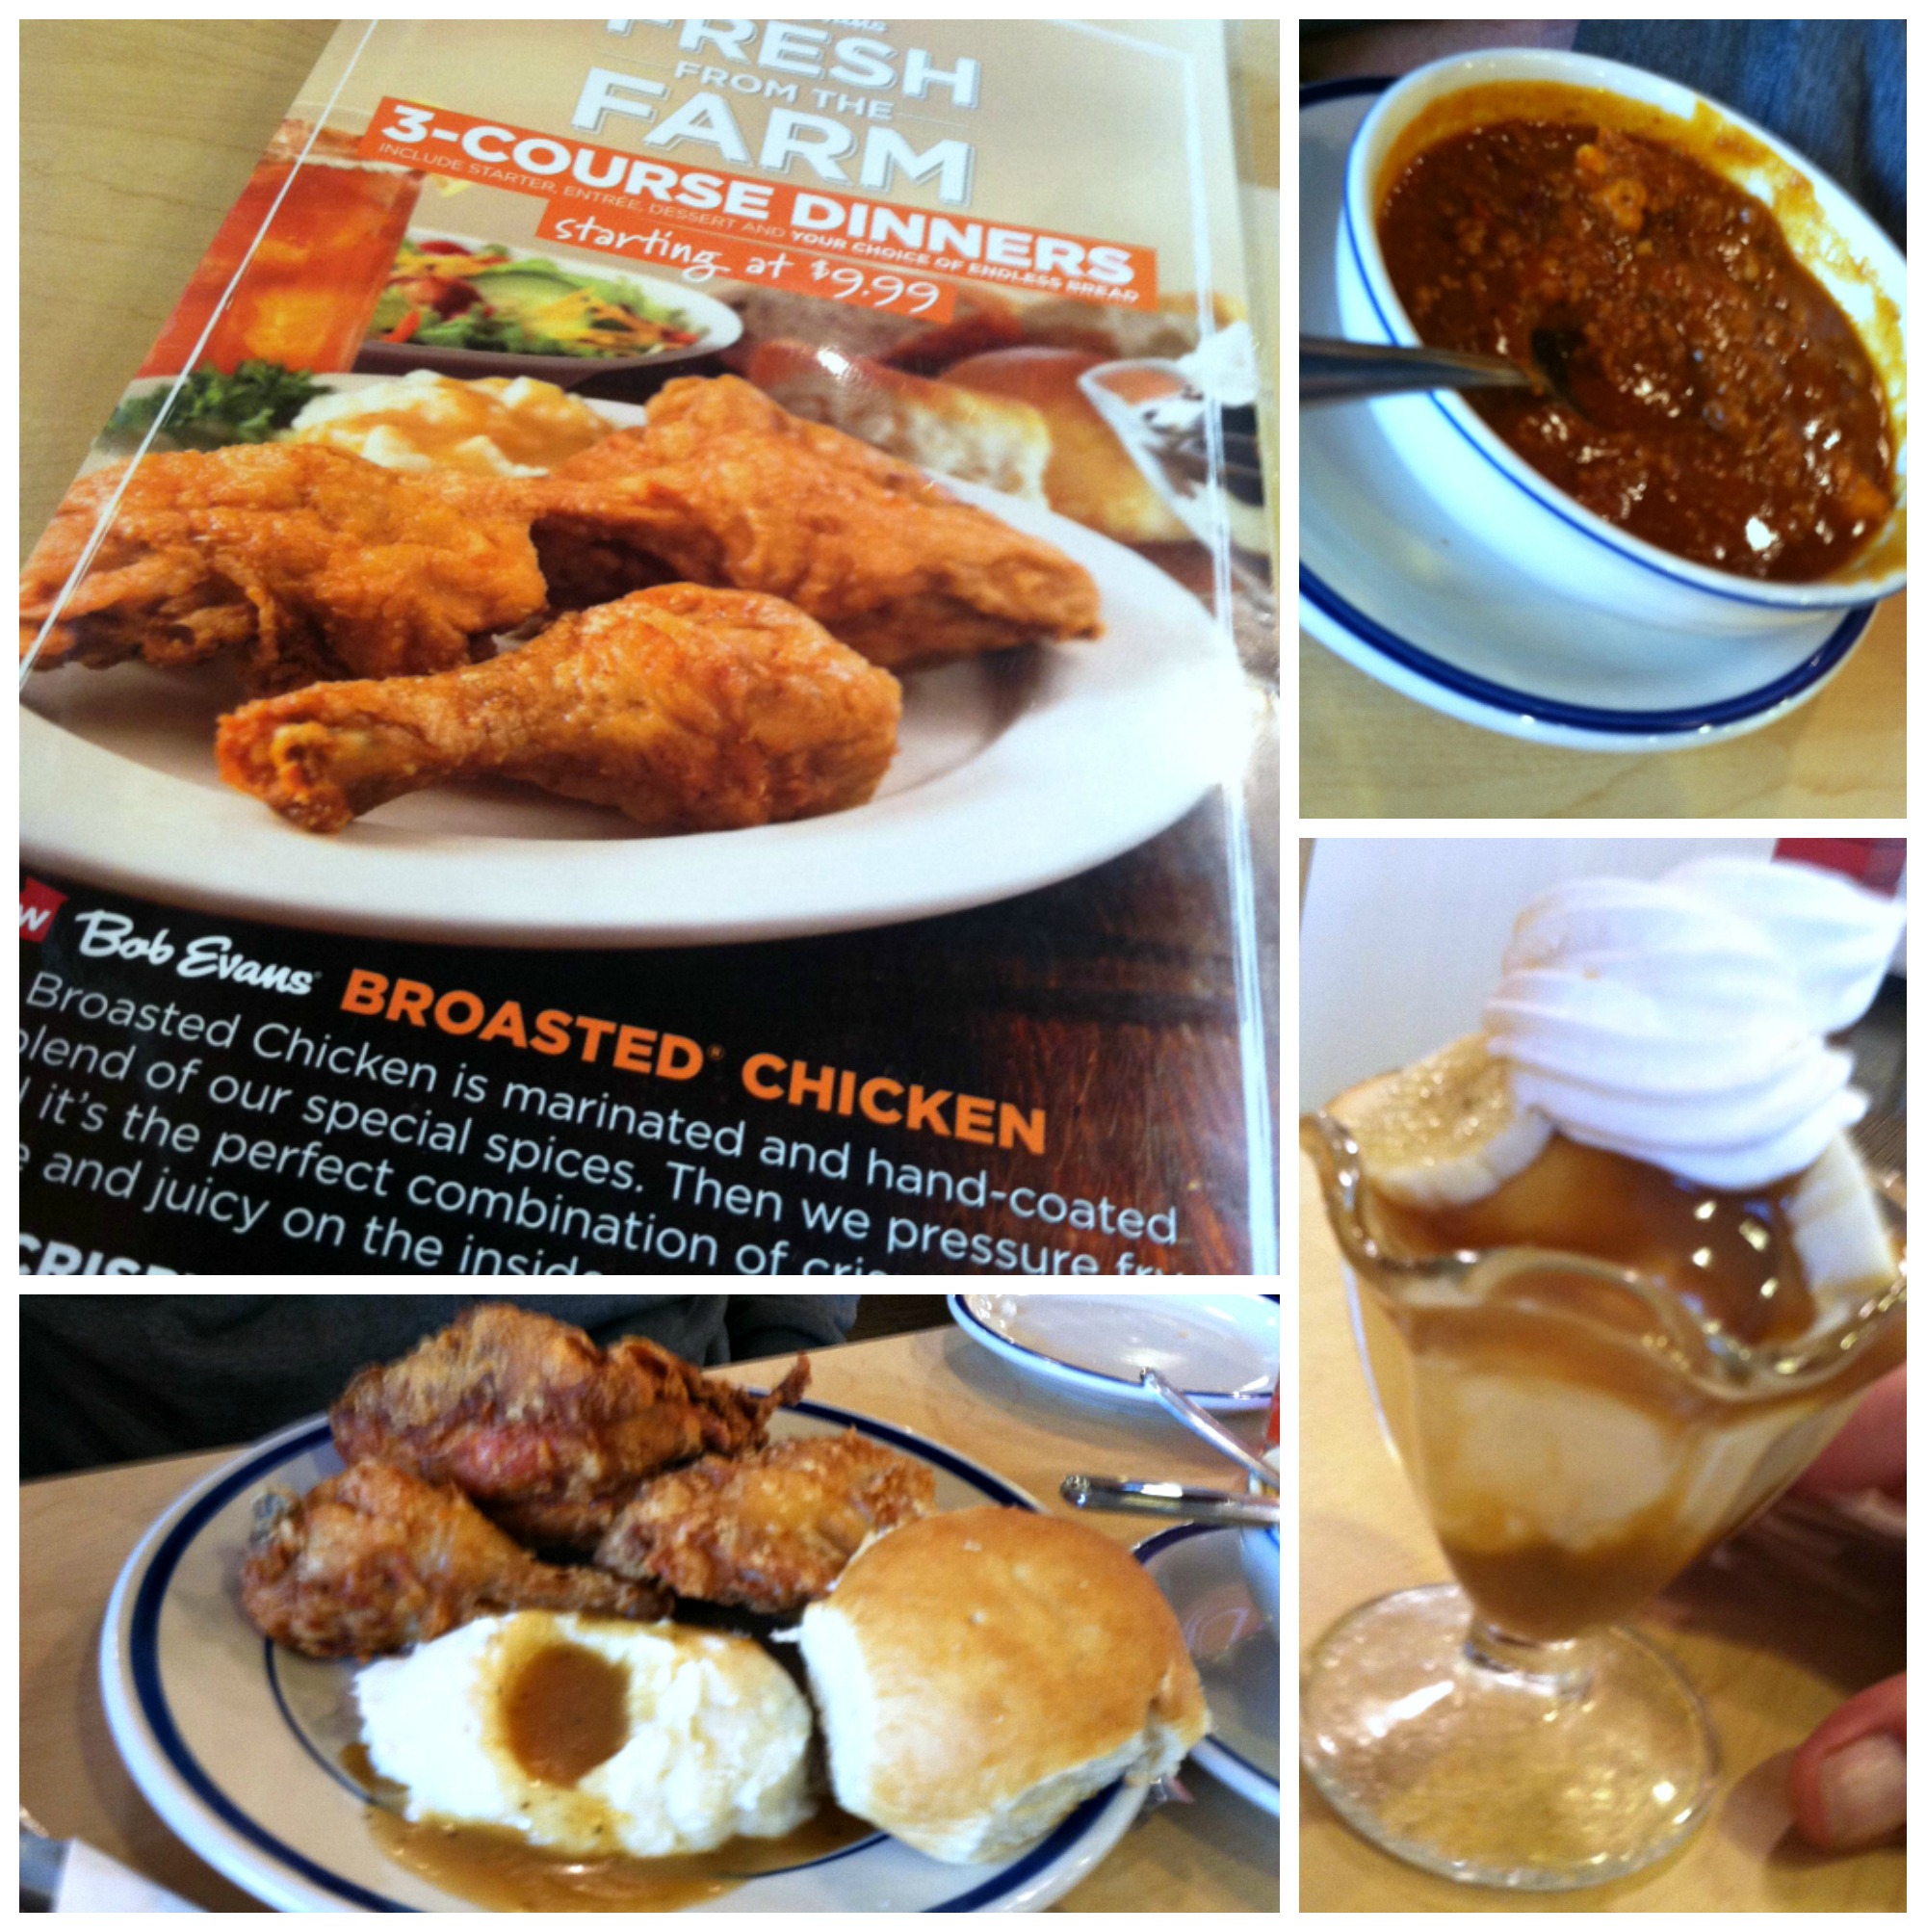 Bob Evans Broasted Chicken Meal (+Gift Card Giveaway - Ends 5/5) | Optimistic Mommy